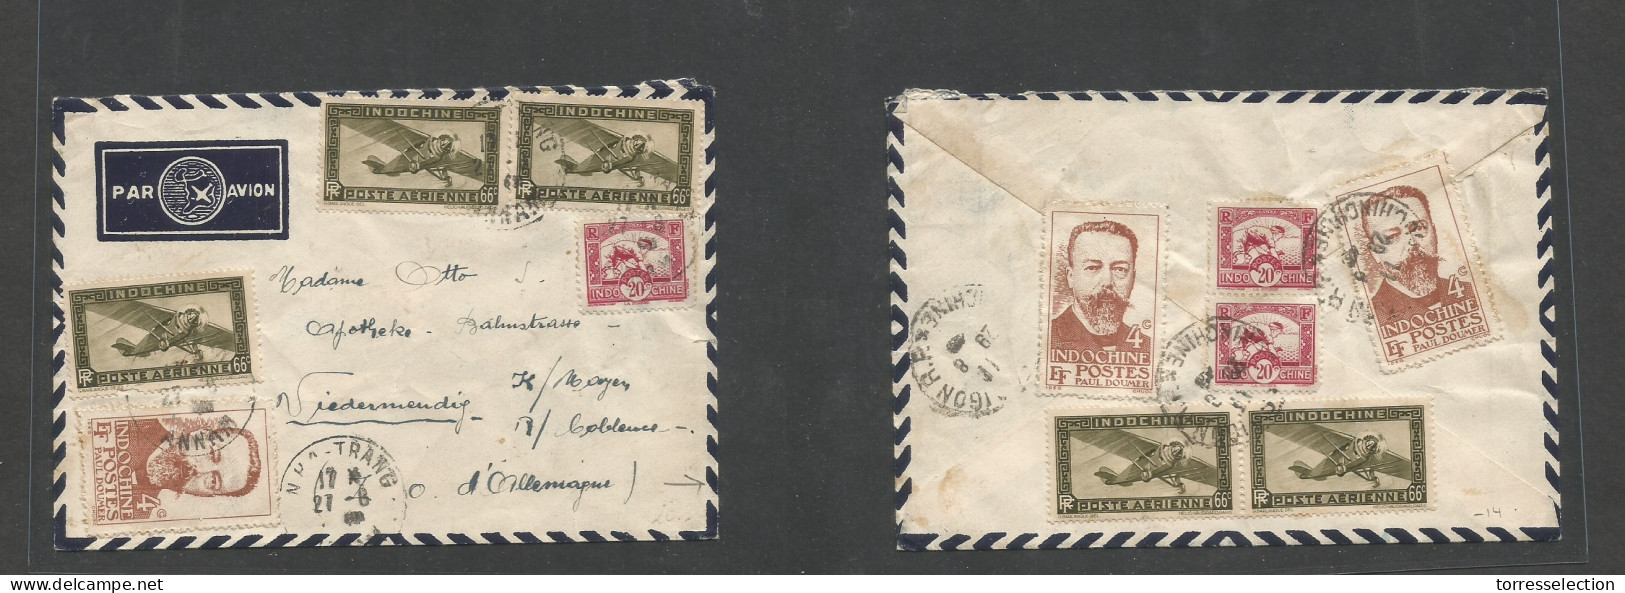 INDOCHINA. C. 1932. Nha Trang - Germany, Viedermendig. Air Multifkd Front And Reverse. Fine Used. SALE. - Otros - Asia